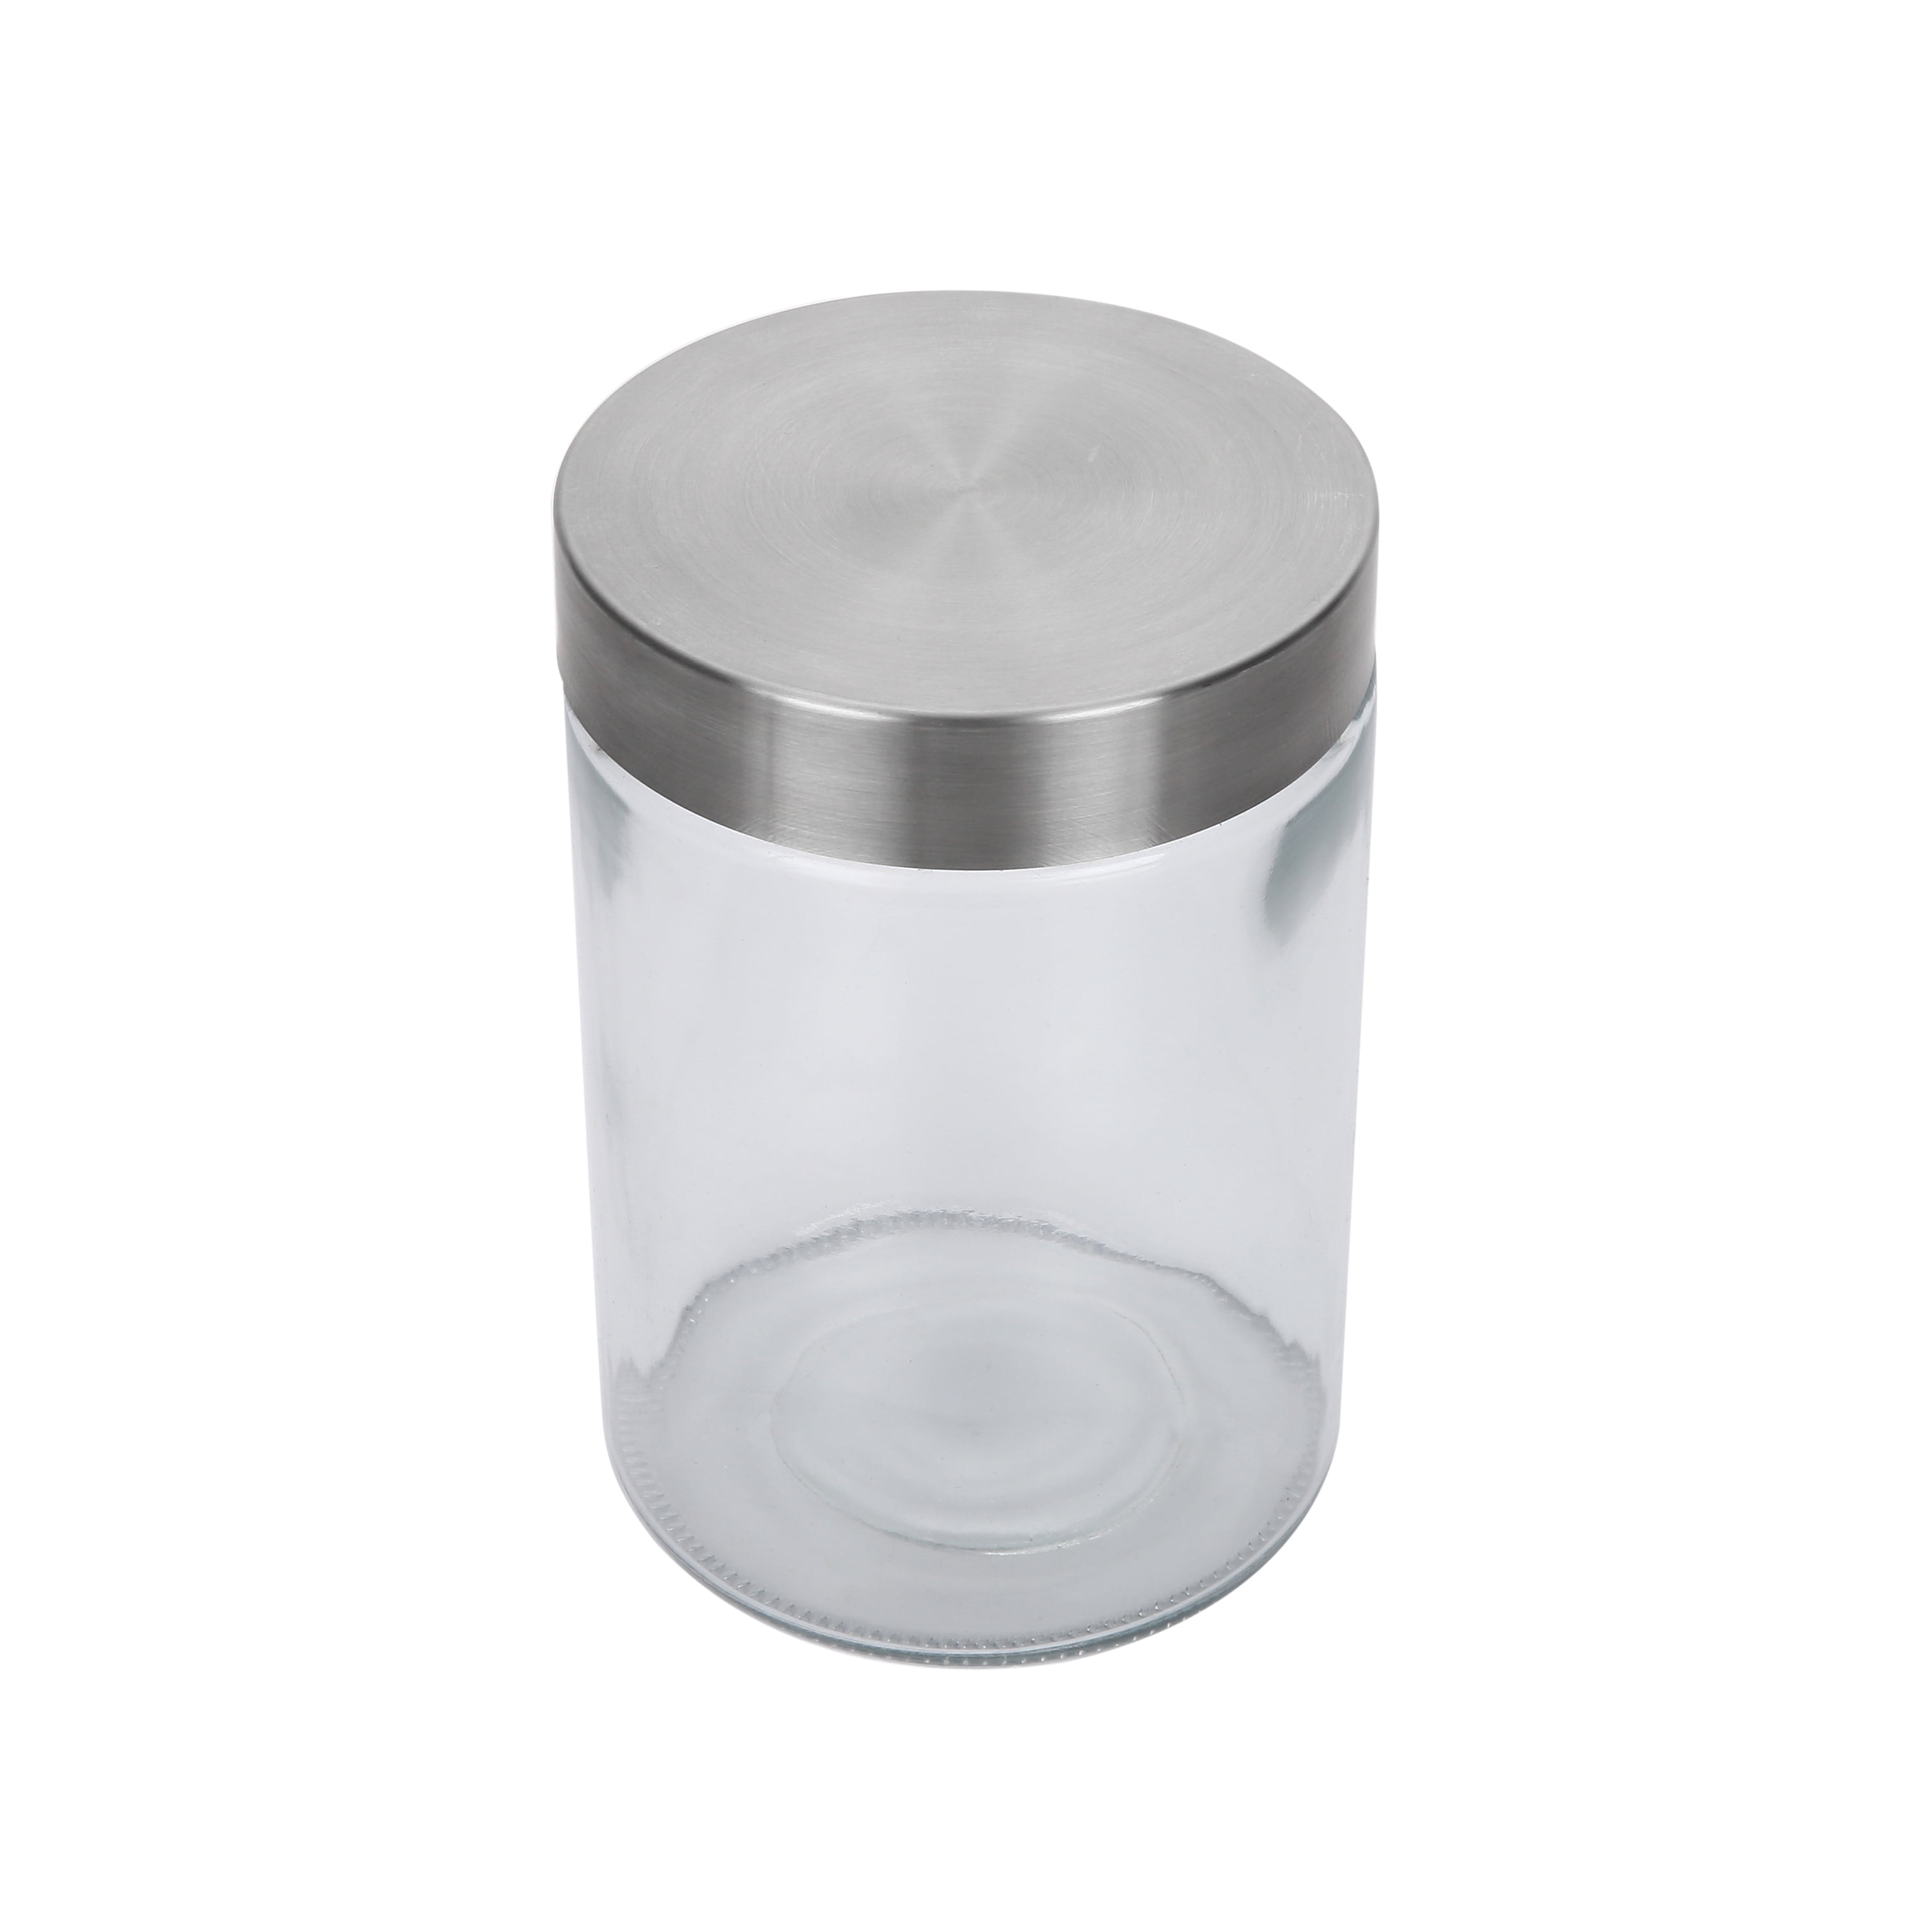 Carraway Etched Glass Canister with Lid